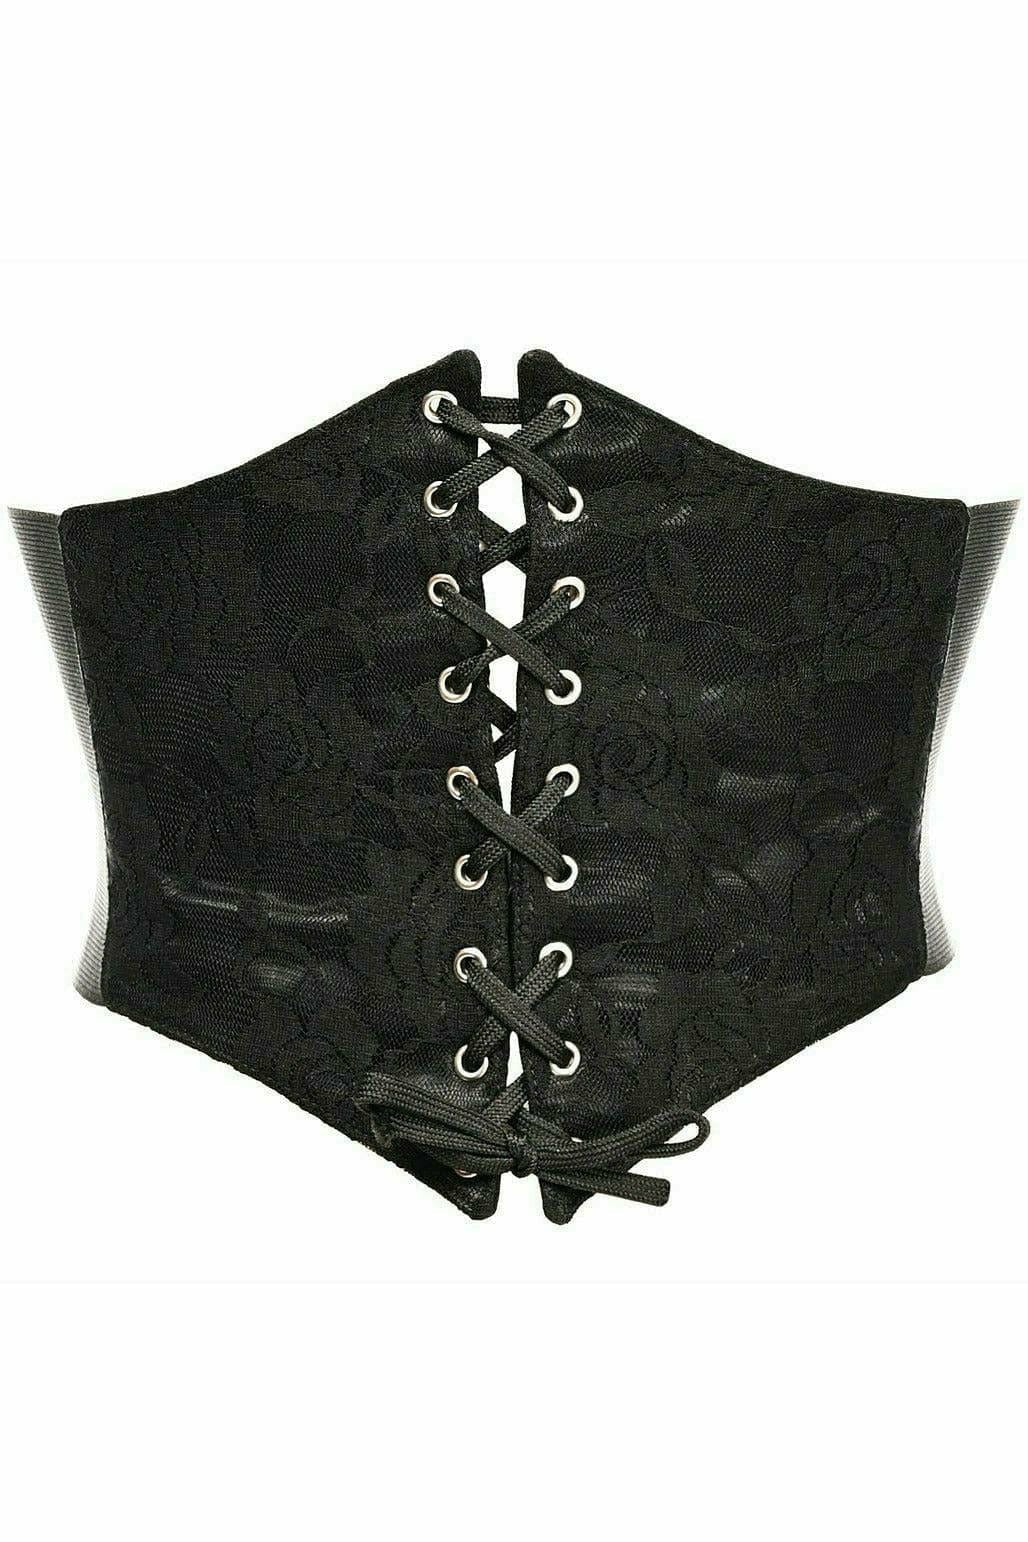 Sexy Black with Black Lace Overlay Corset Belt Cincher Musotica.com